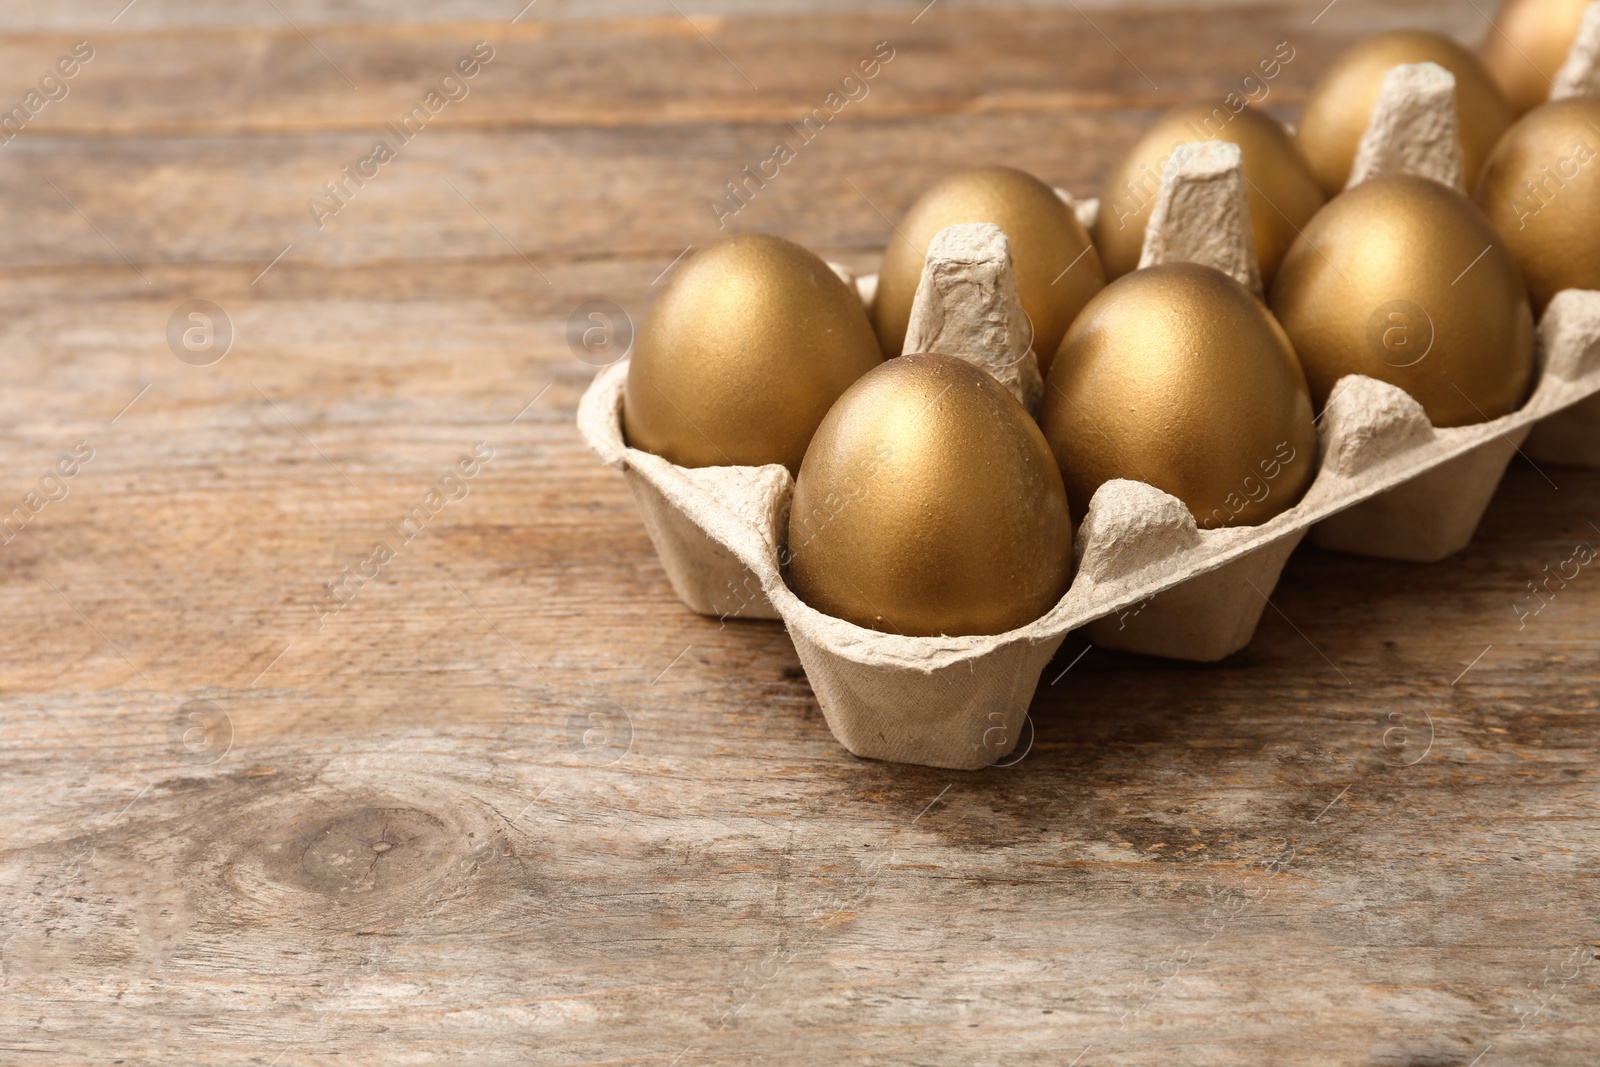 Photo of Carton with golden eggs on wooden table, space for text